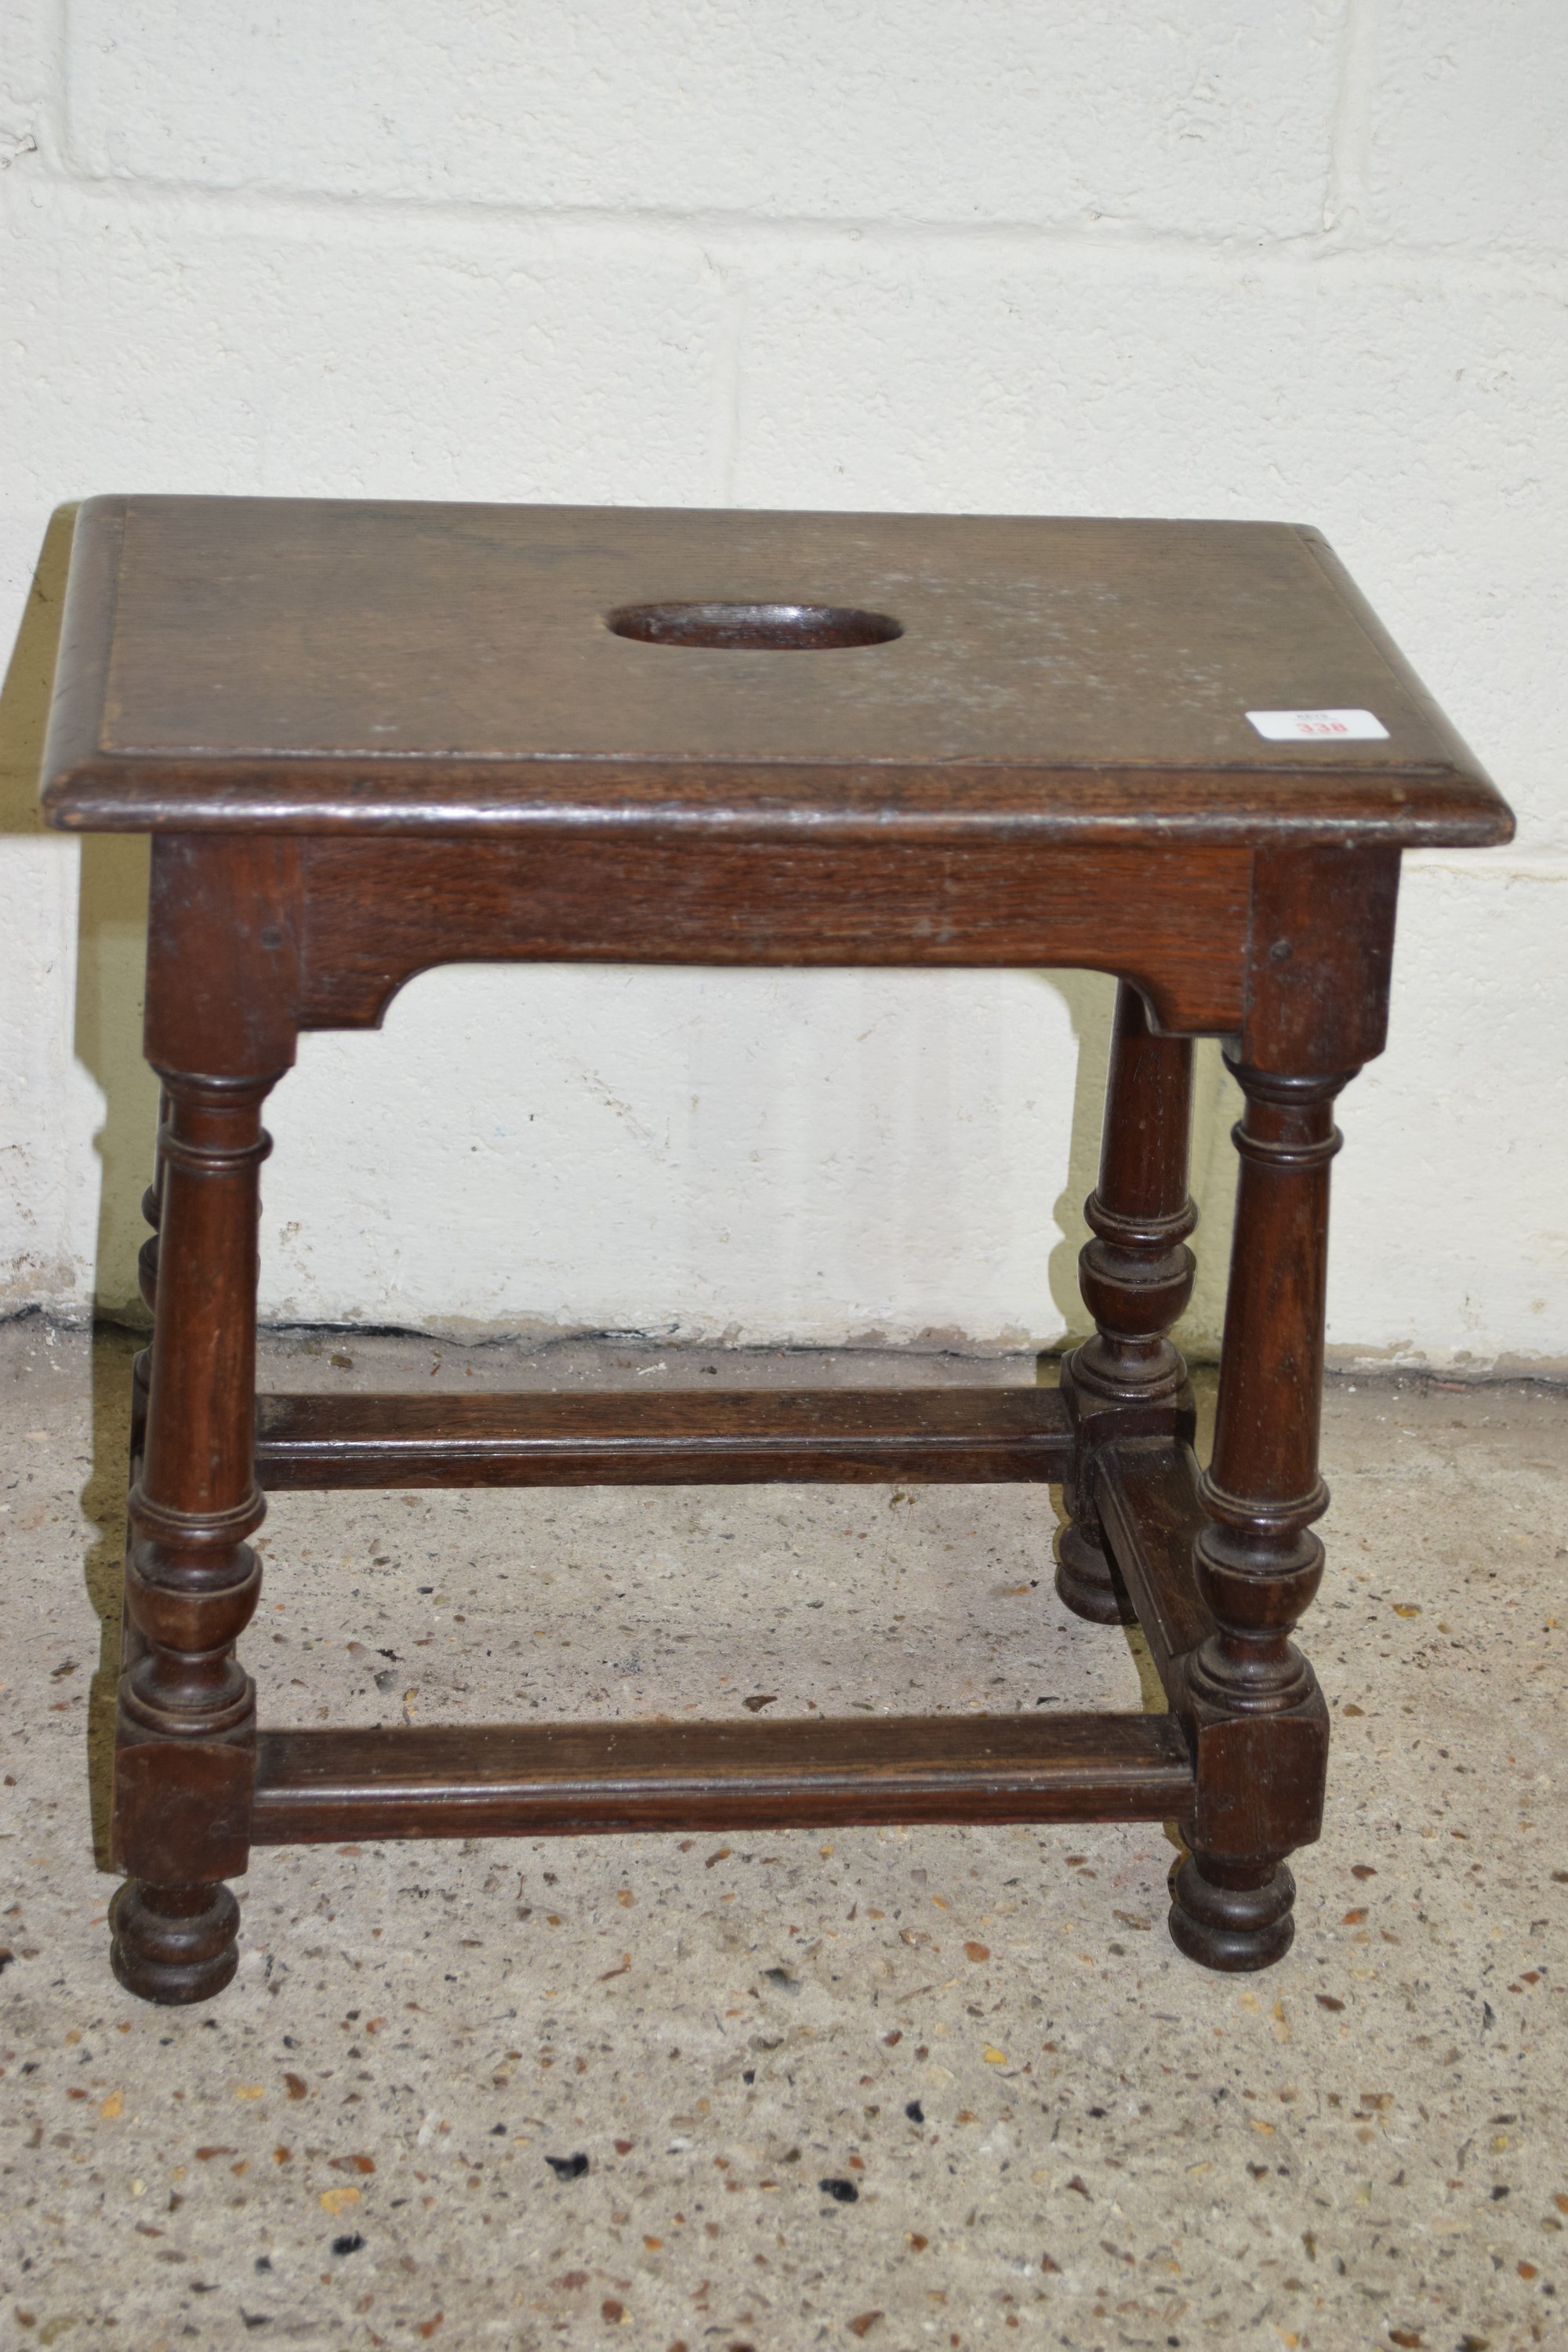 SMALL 19TH CENTURY JOINTED STOOL, APPROX 41 X 25CM